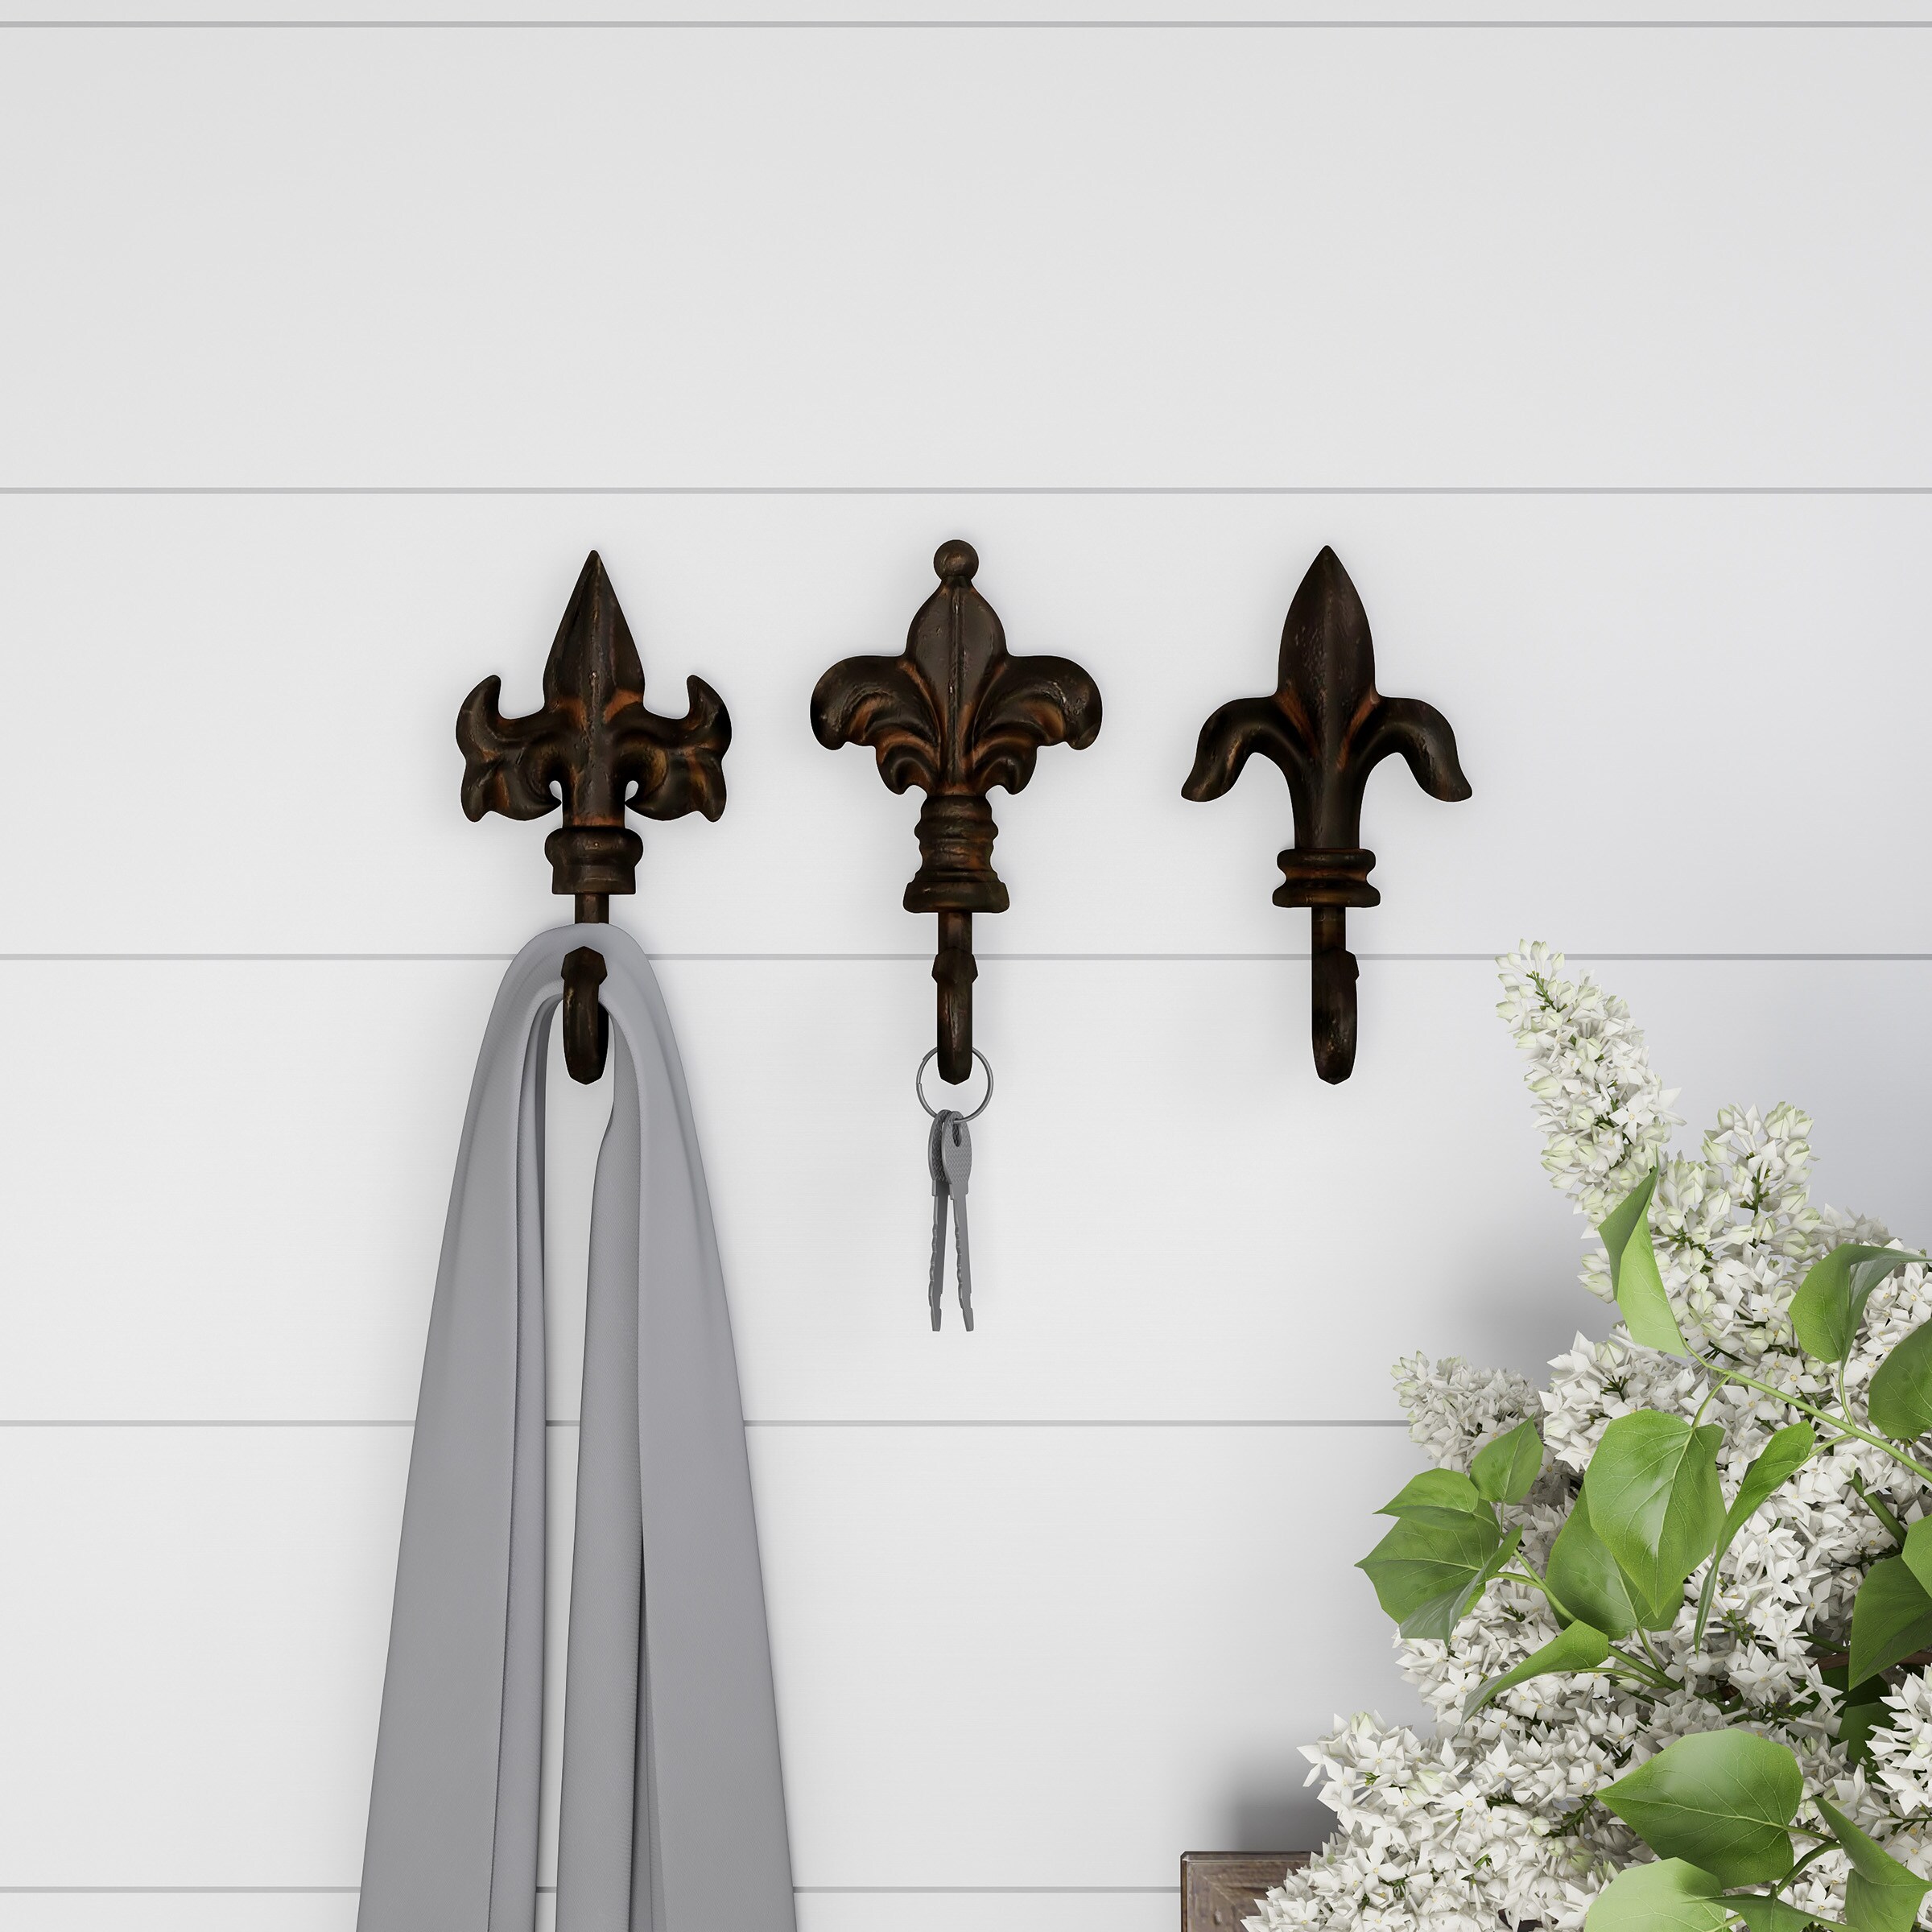 with Screws and Anchors CA-1504-30-BR Comfify Set of 3 Decorative Wall Mounted Coat Hook Cast Iron Fleur De Lis Double Wall Hooks/Hangers Rustic Cast Iron 